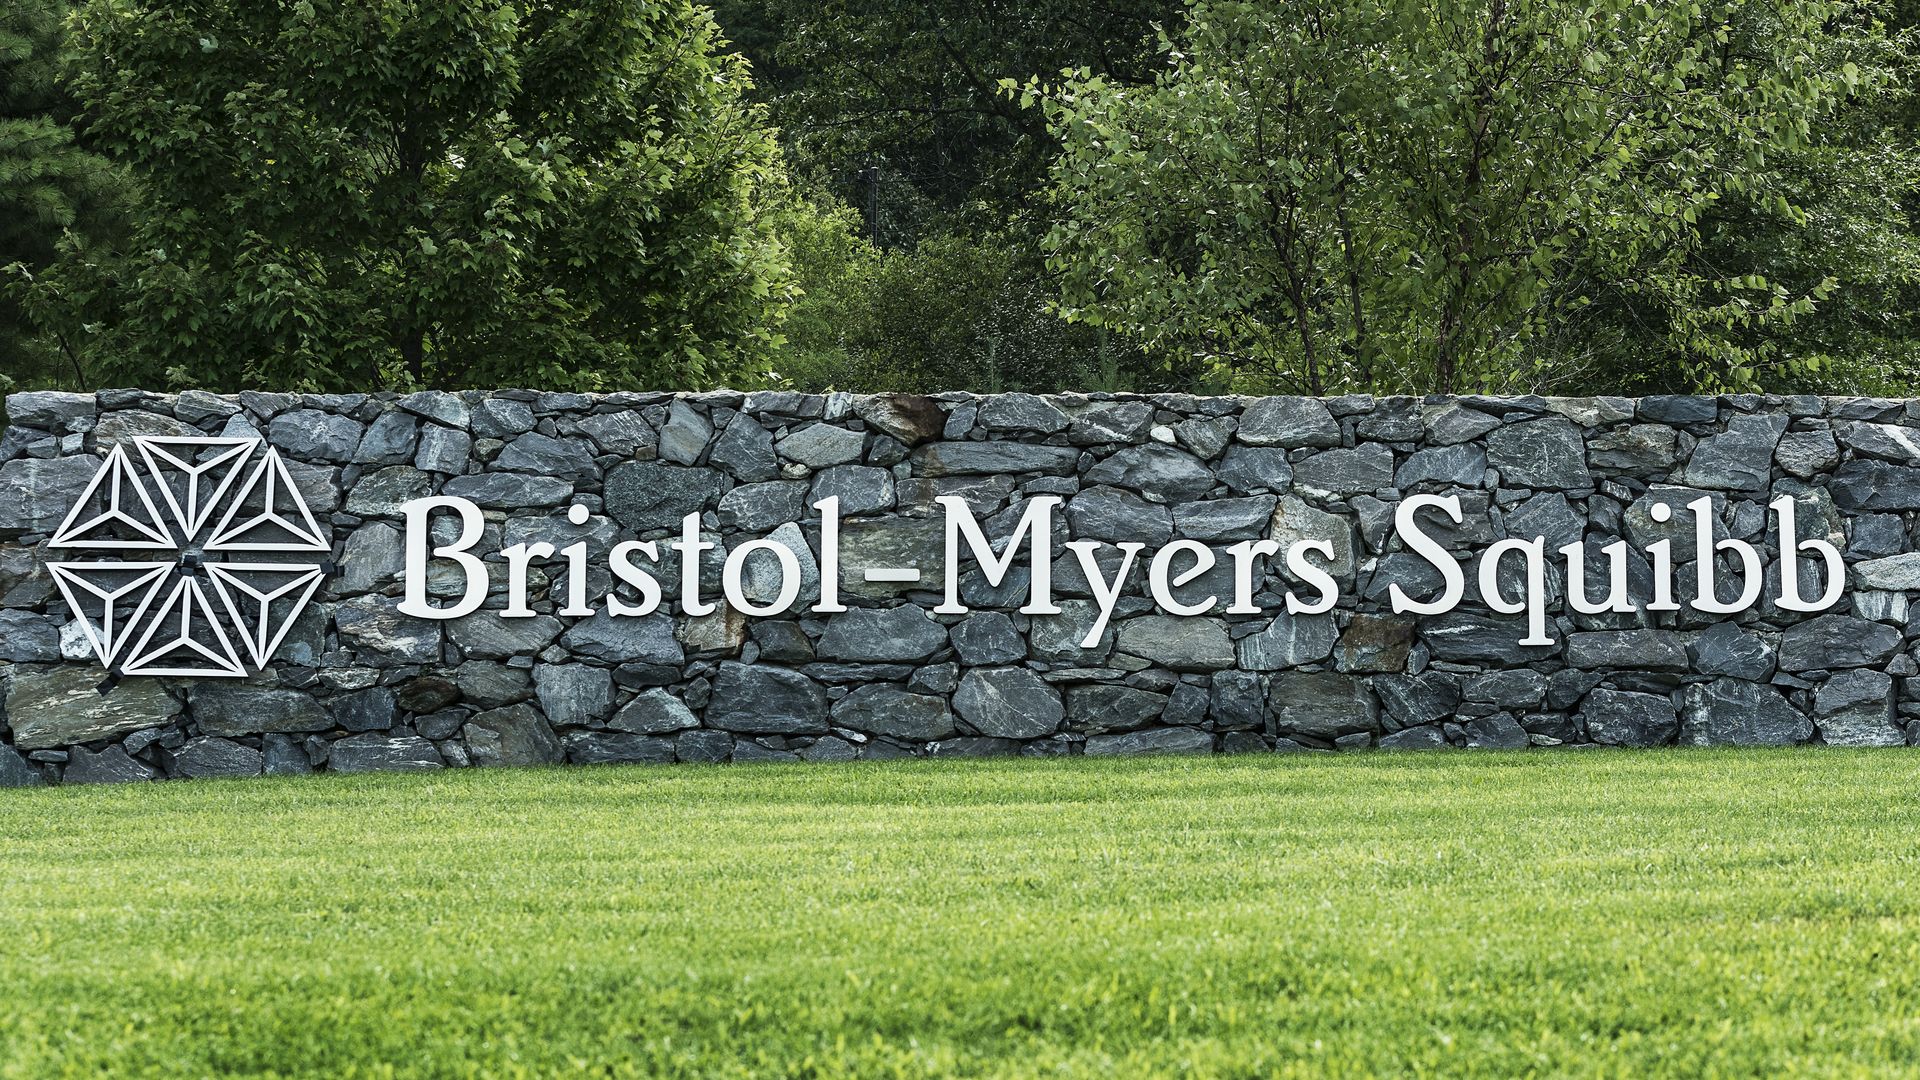 The corporate headquarters of Bristol-Myers Squibb.